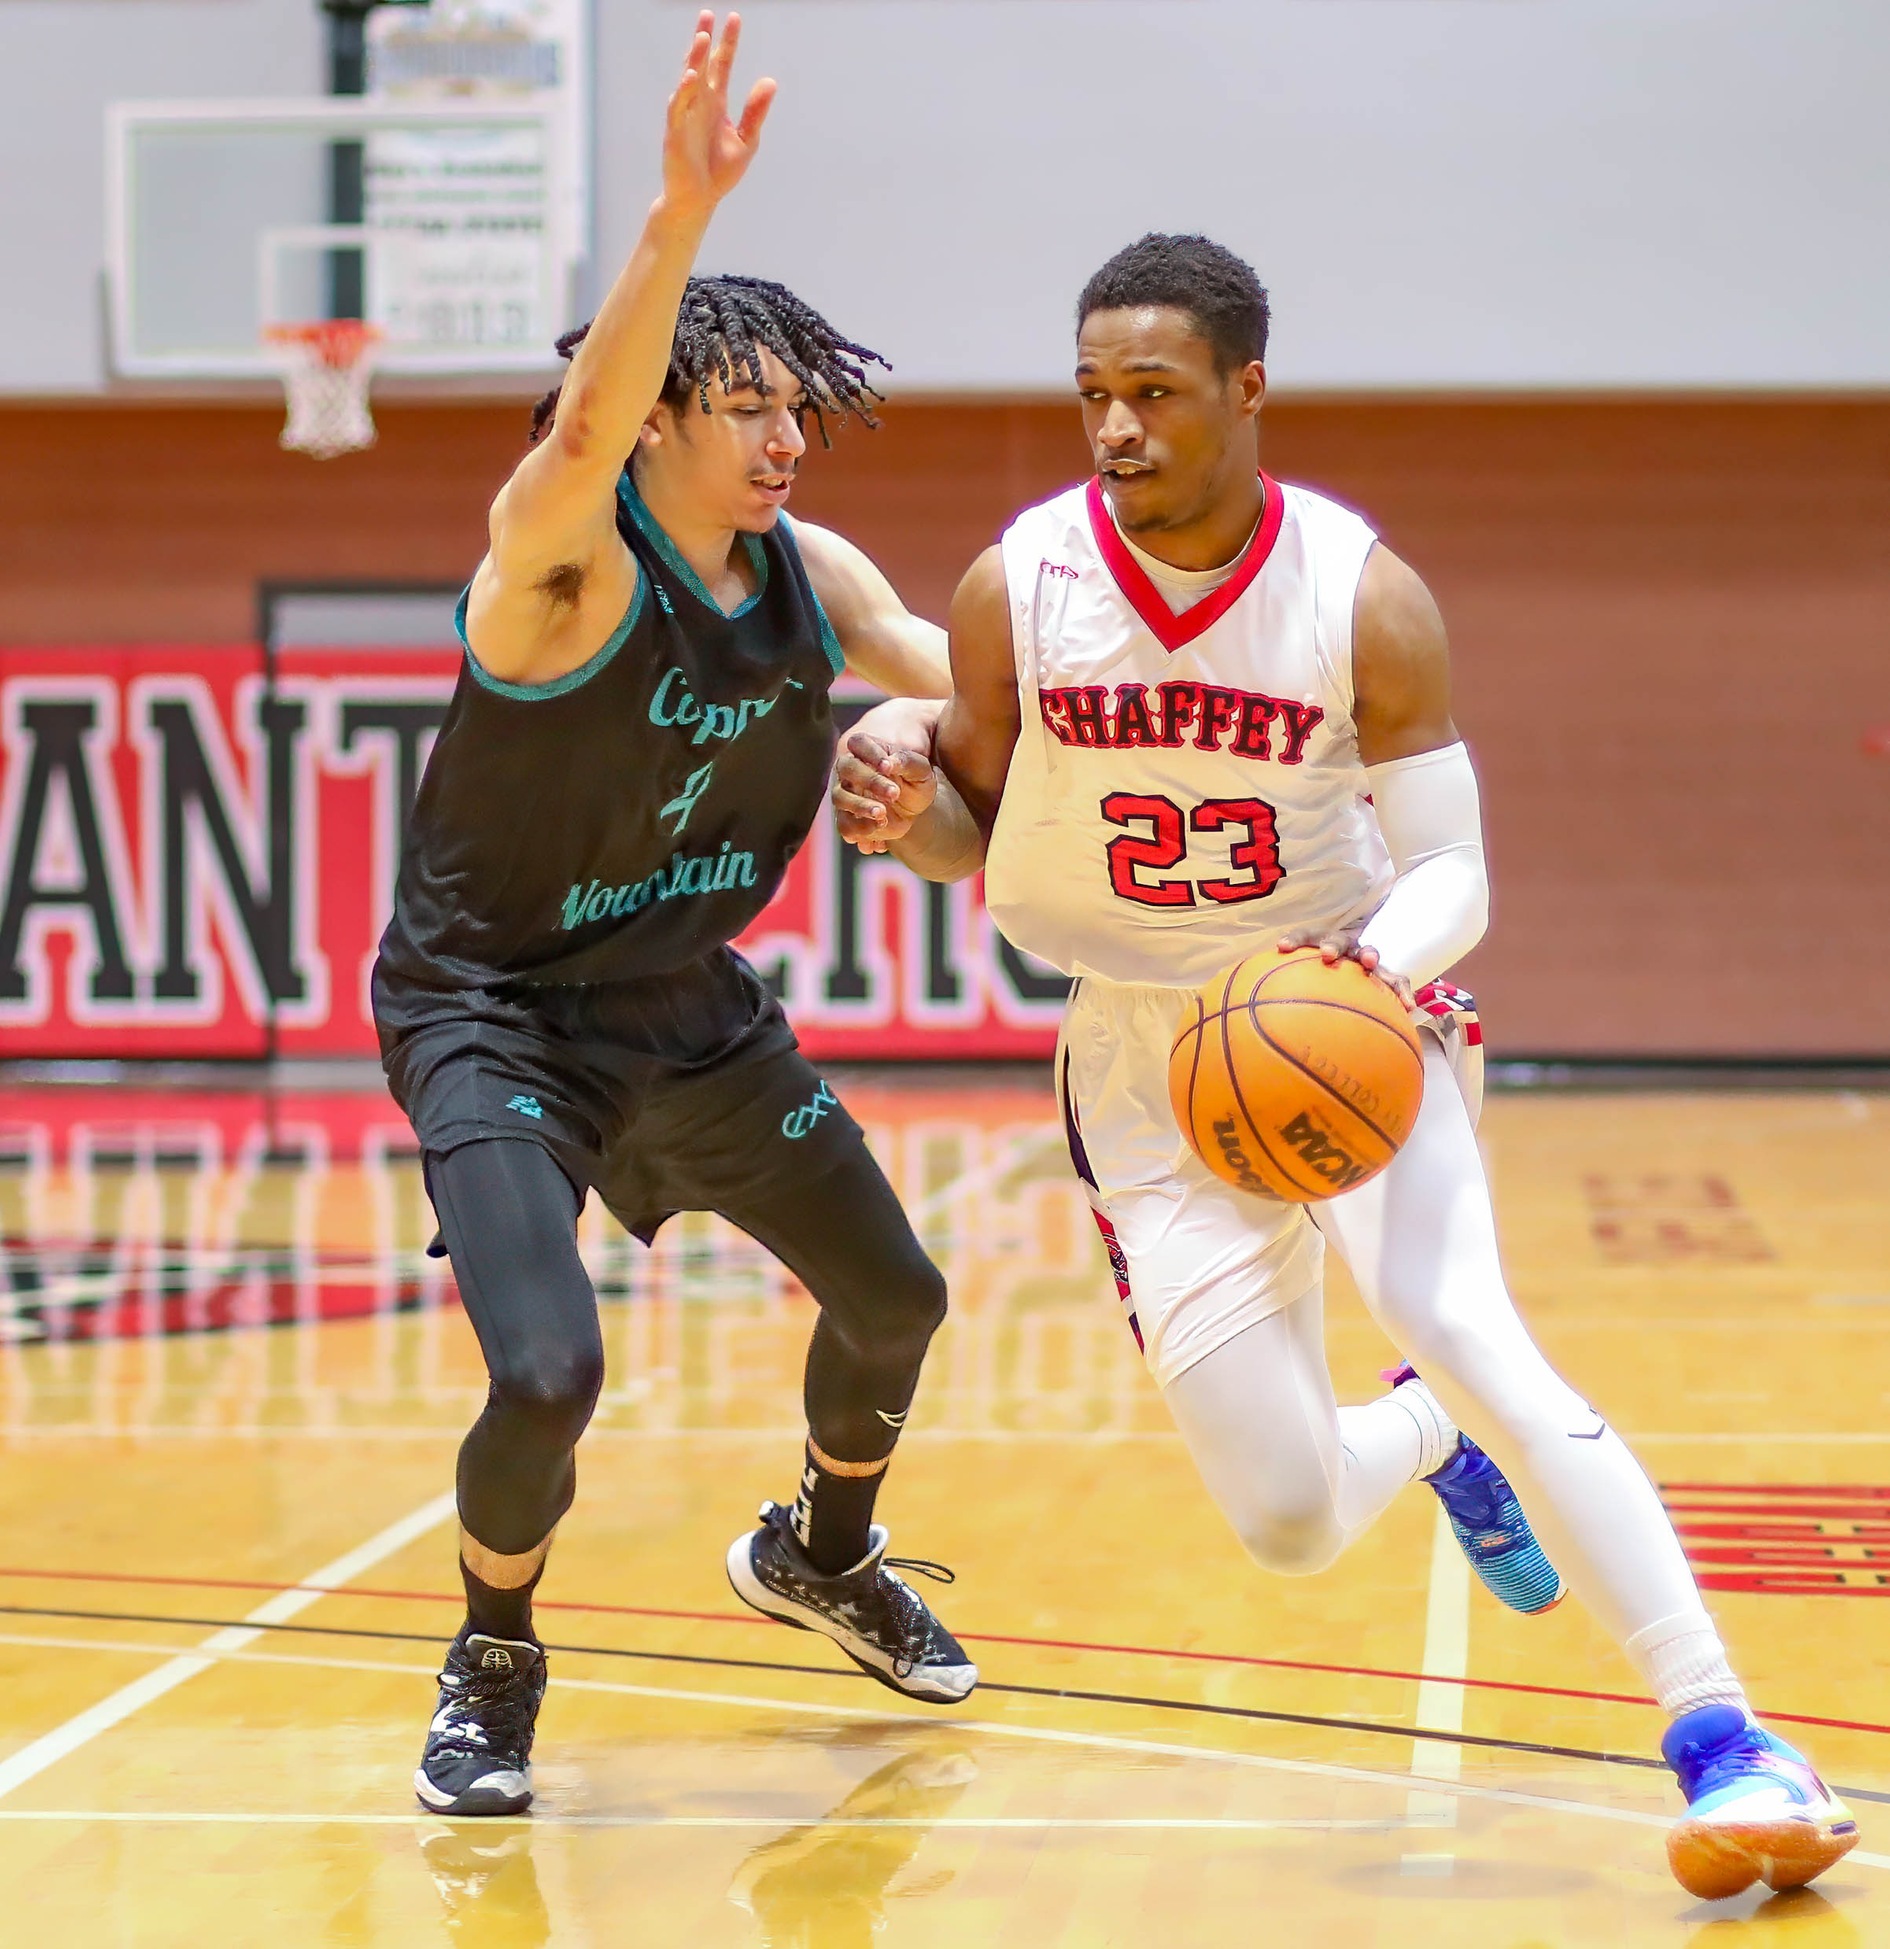 CHAFFEY MEN CLINCH IEAC TITLE WITH WIN AT SAN JACINTO